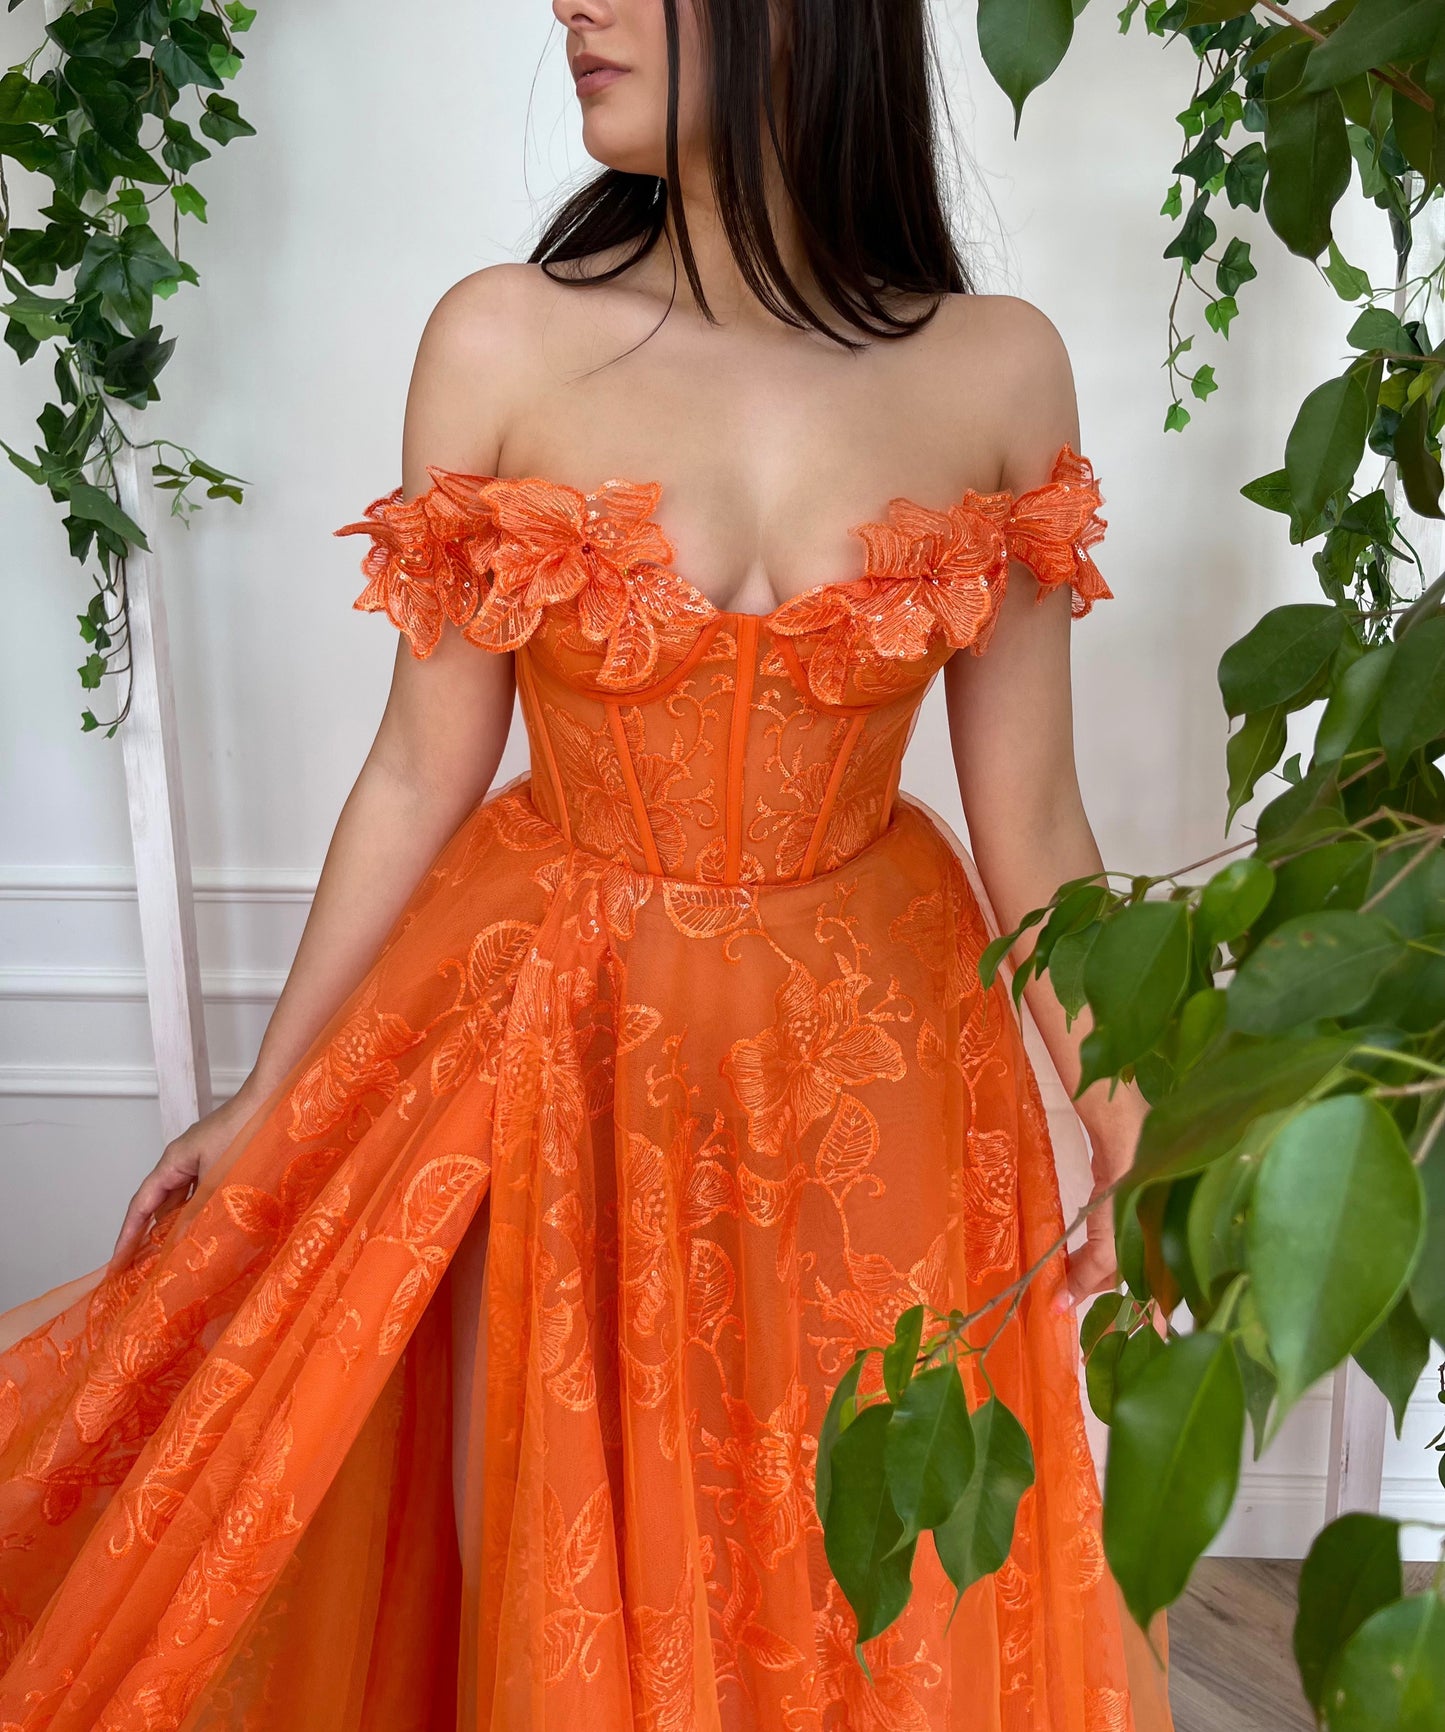 Orange A-Line dress with off the shoulder sleeves and embroidery